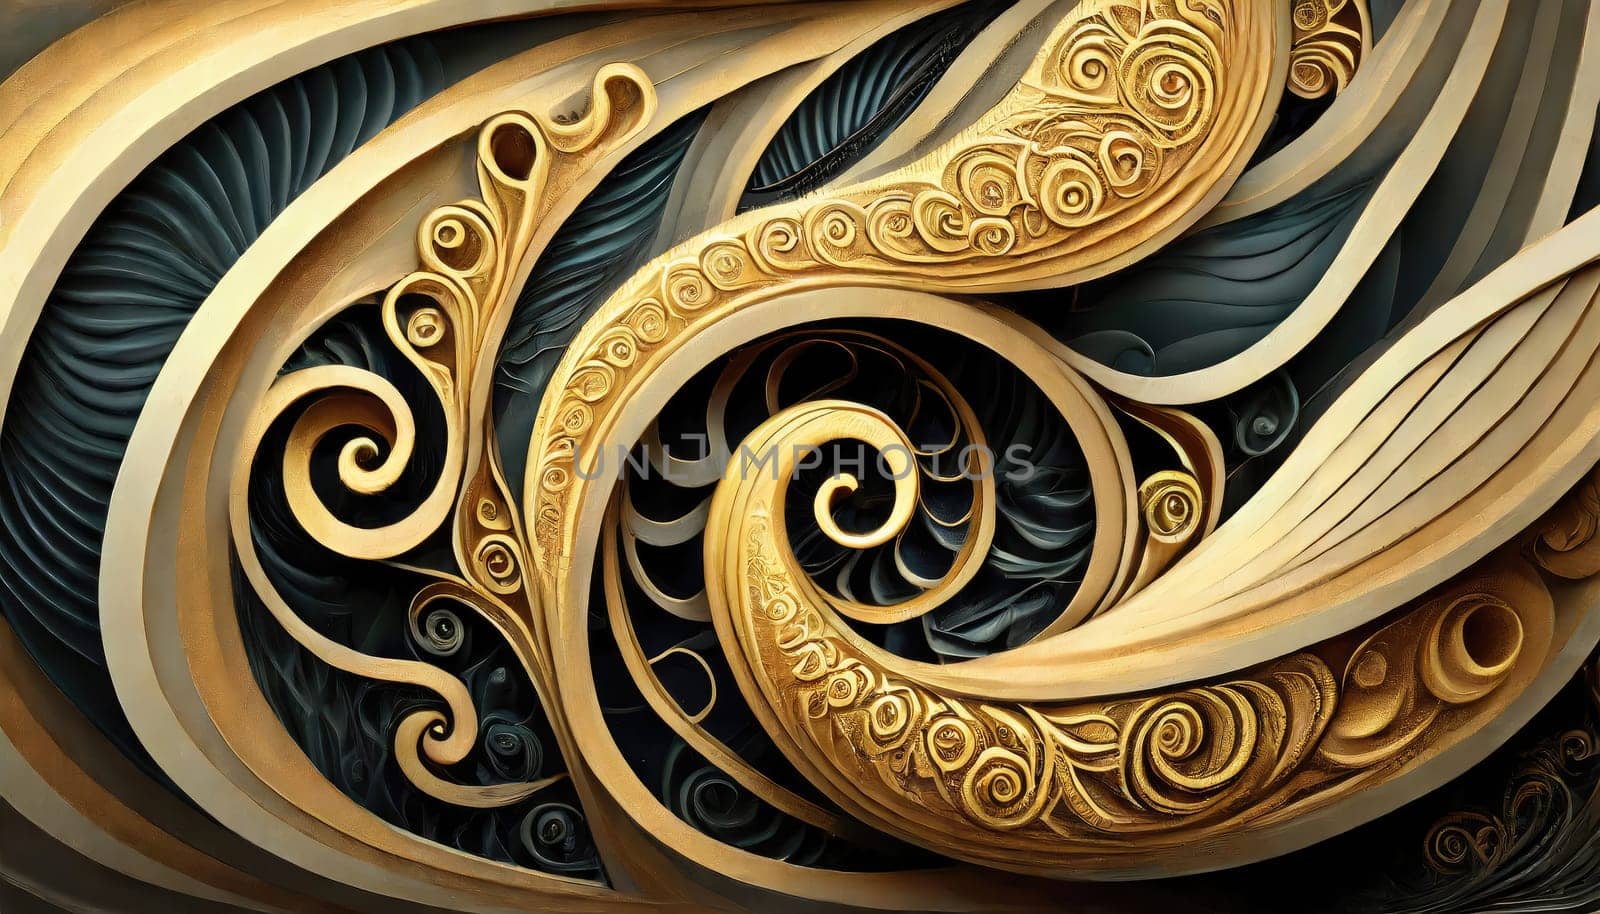 abstract swirling designs, very intricate, 3d design